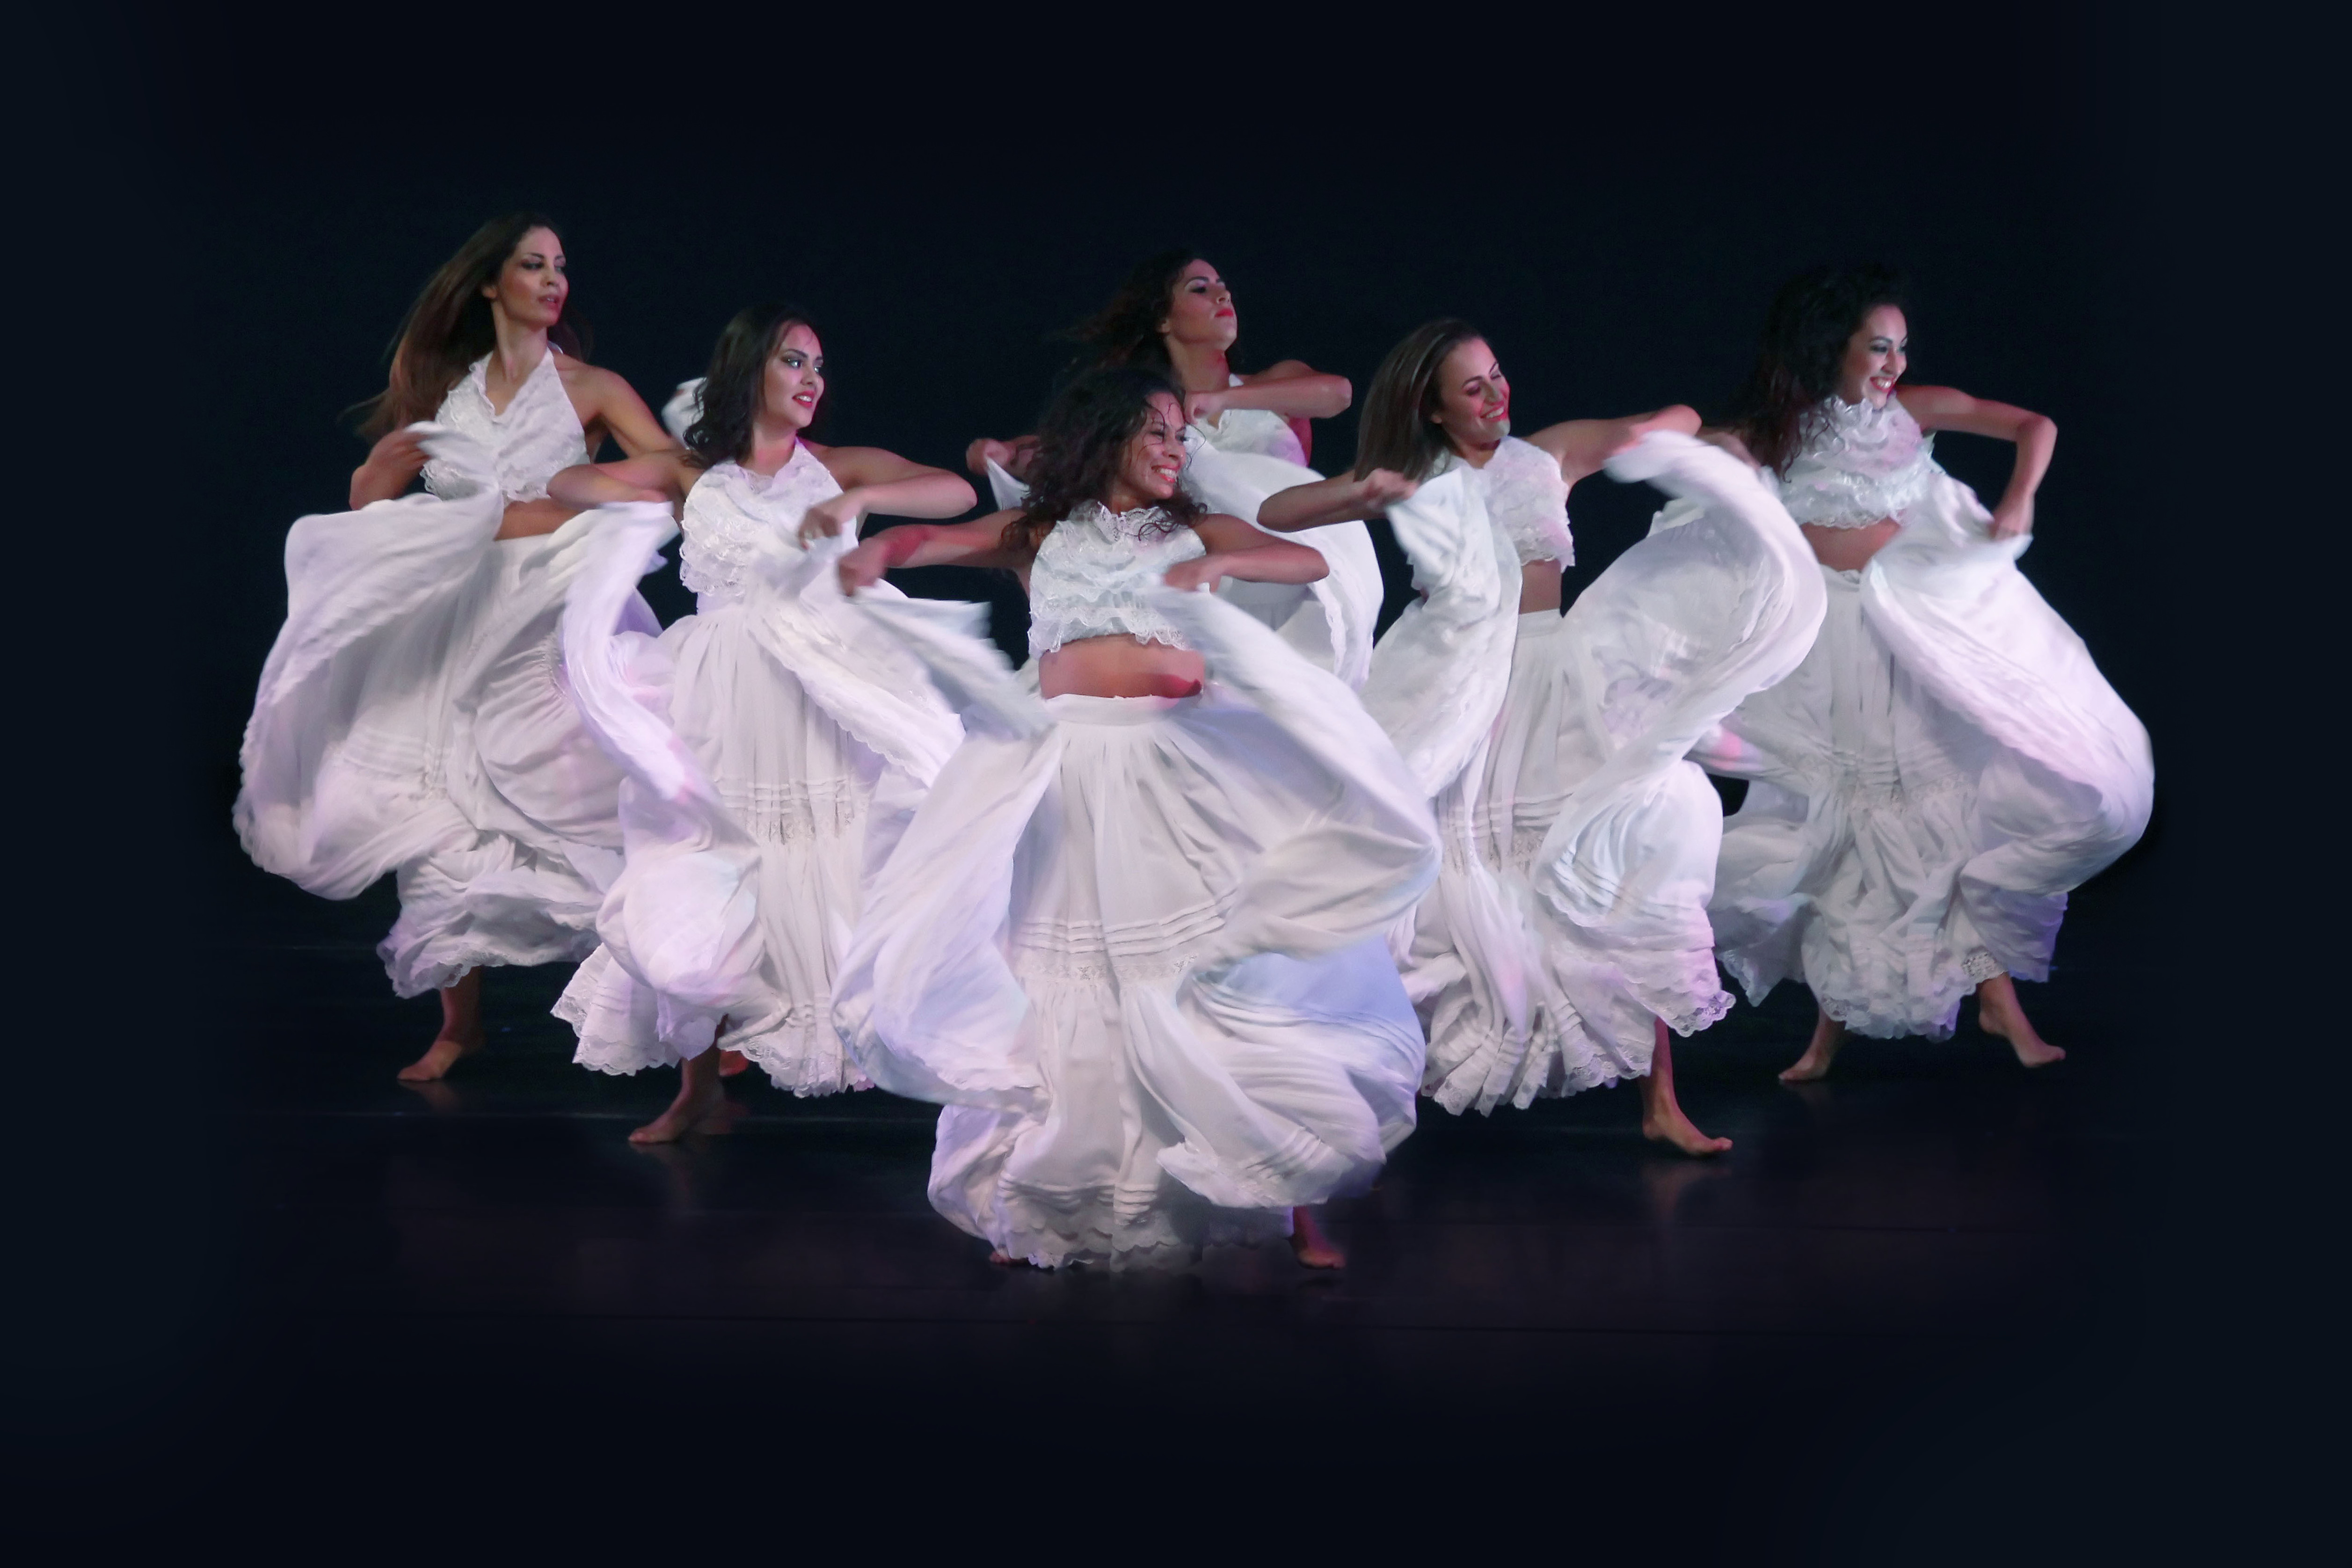 The Colombian Folkloric Ballet from Houston, Texas.